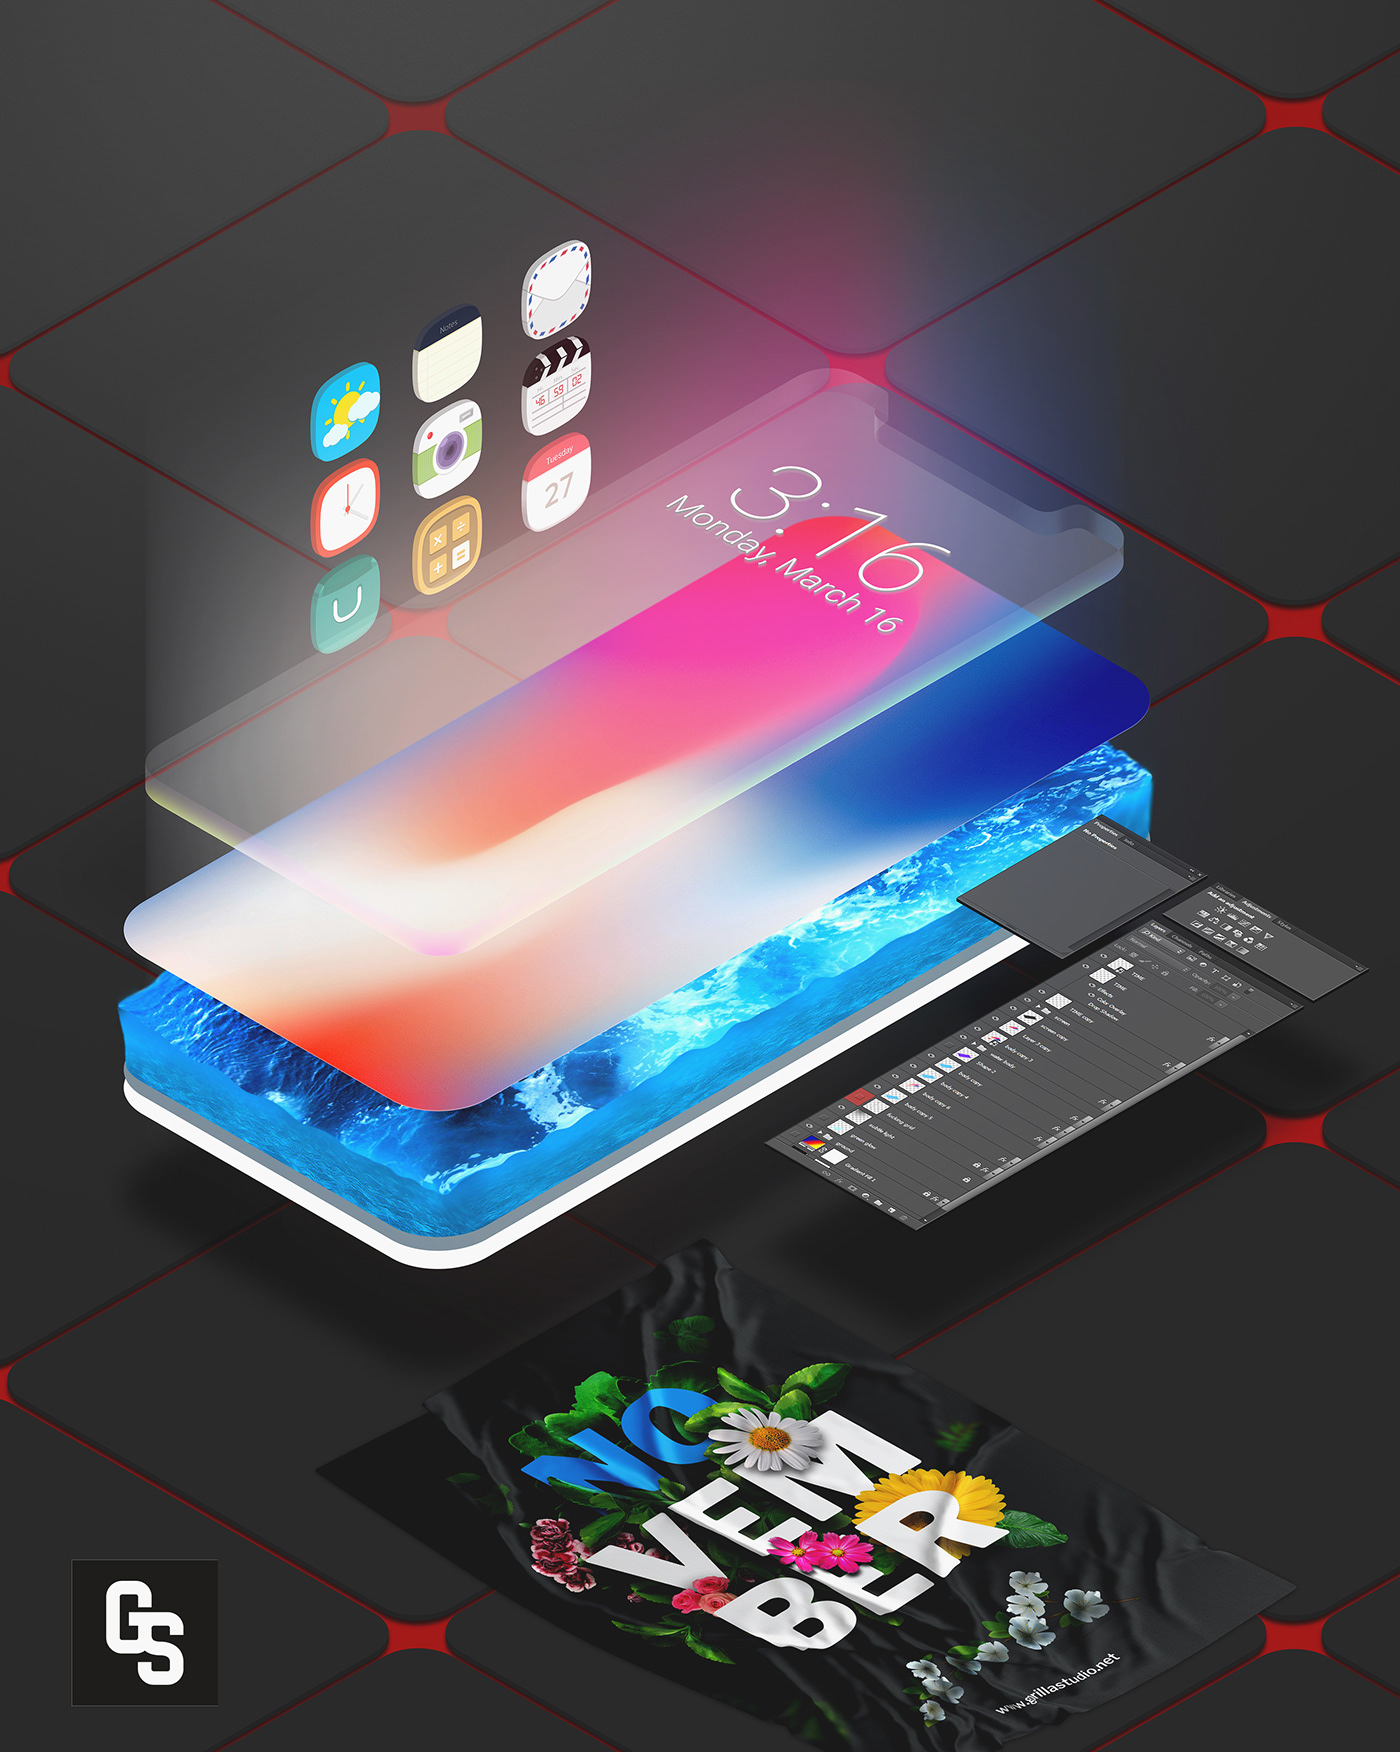 layers UI/UX Web Design  user interface design trends 2018 design iPhone x graphic dsign 2018 LATEST